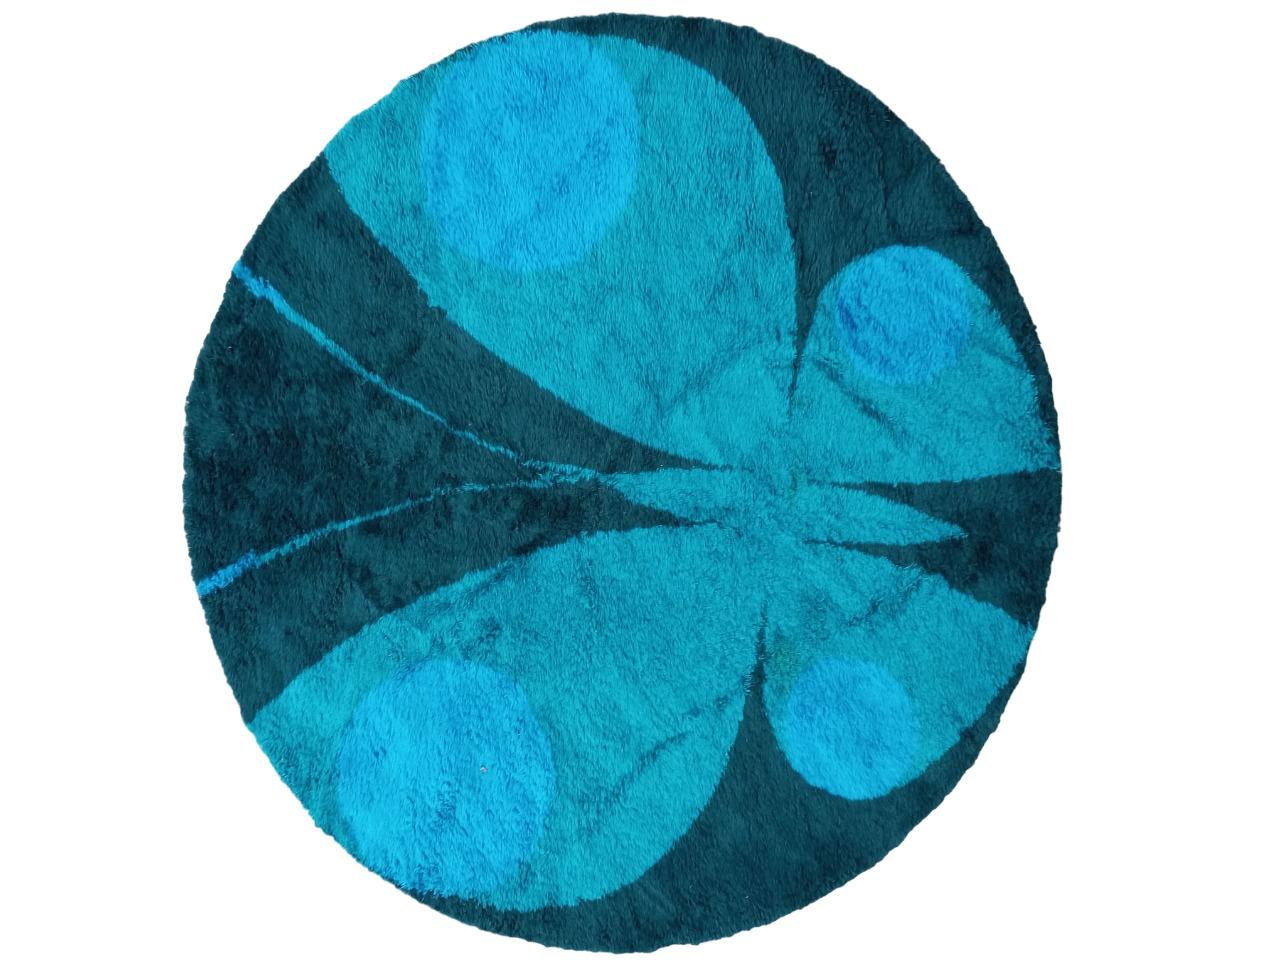 This carpet is a magnificent circular specimen with an impressive diameter of 275 centimeters. Its base is an intense and enveloping shade of blue, creating a pleasant sensation of depth and serenity. At the center of the carpet, stands out a large